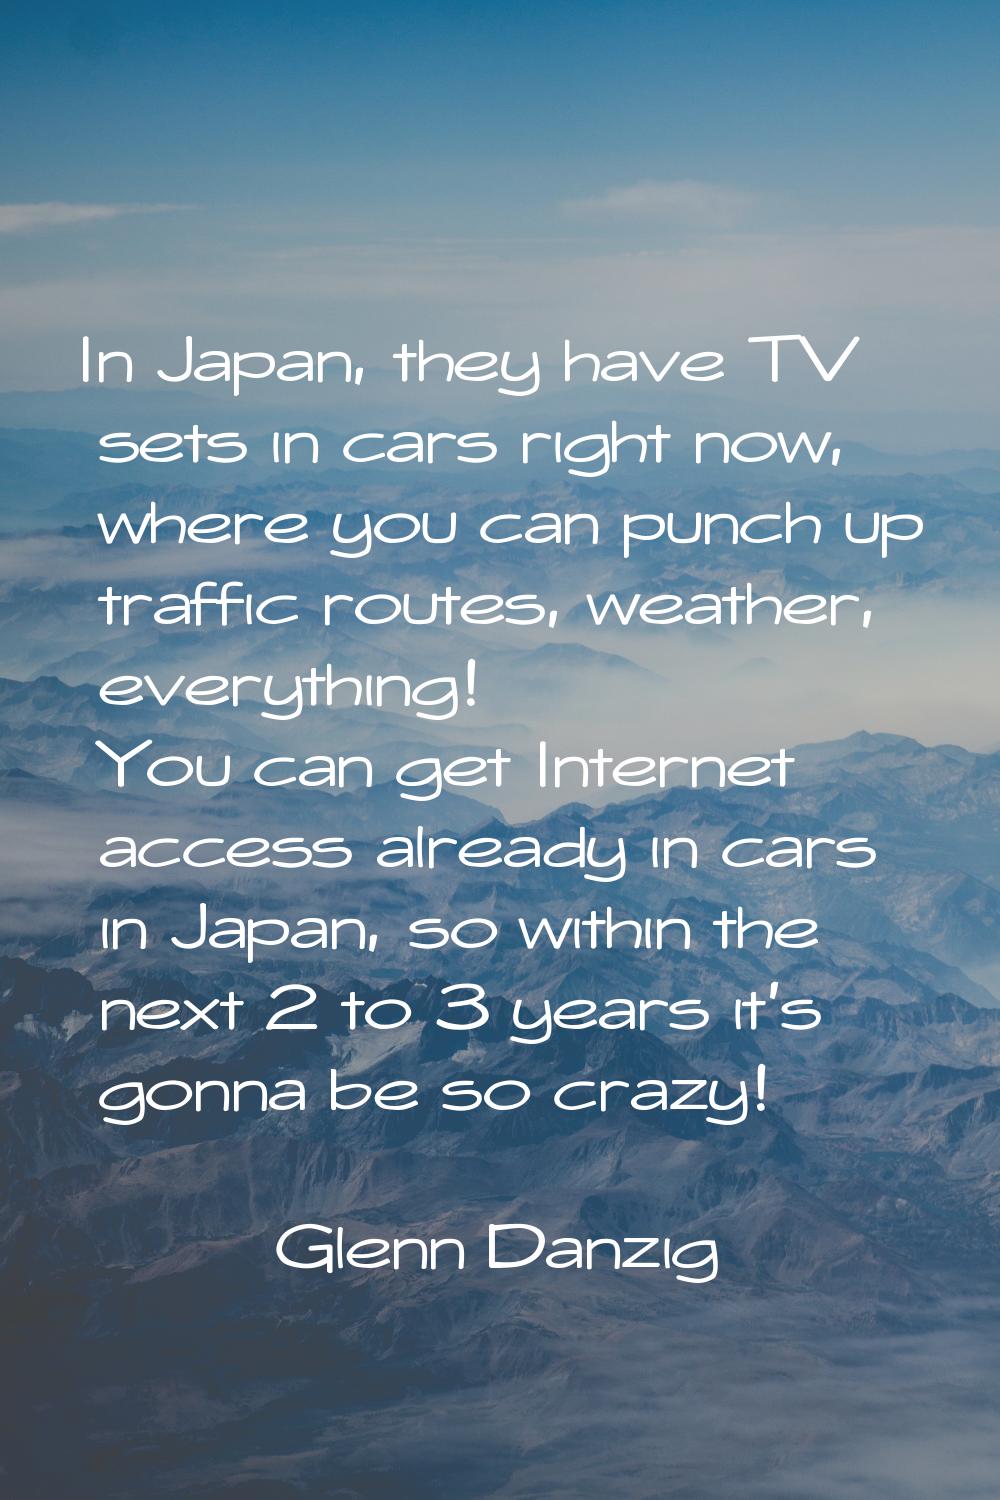 In Japan, they have TV sets in cars right now, where you can punch up traffic routes, weather, ever